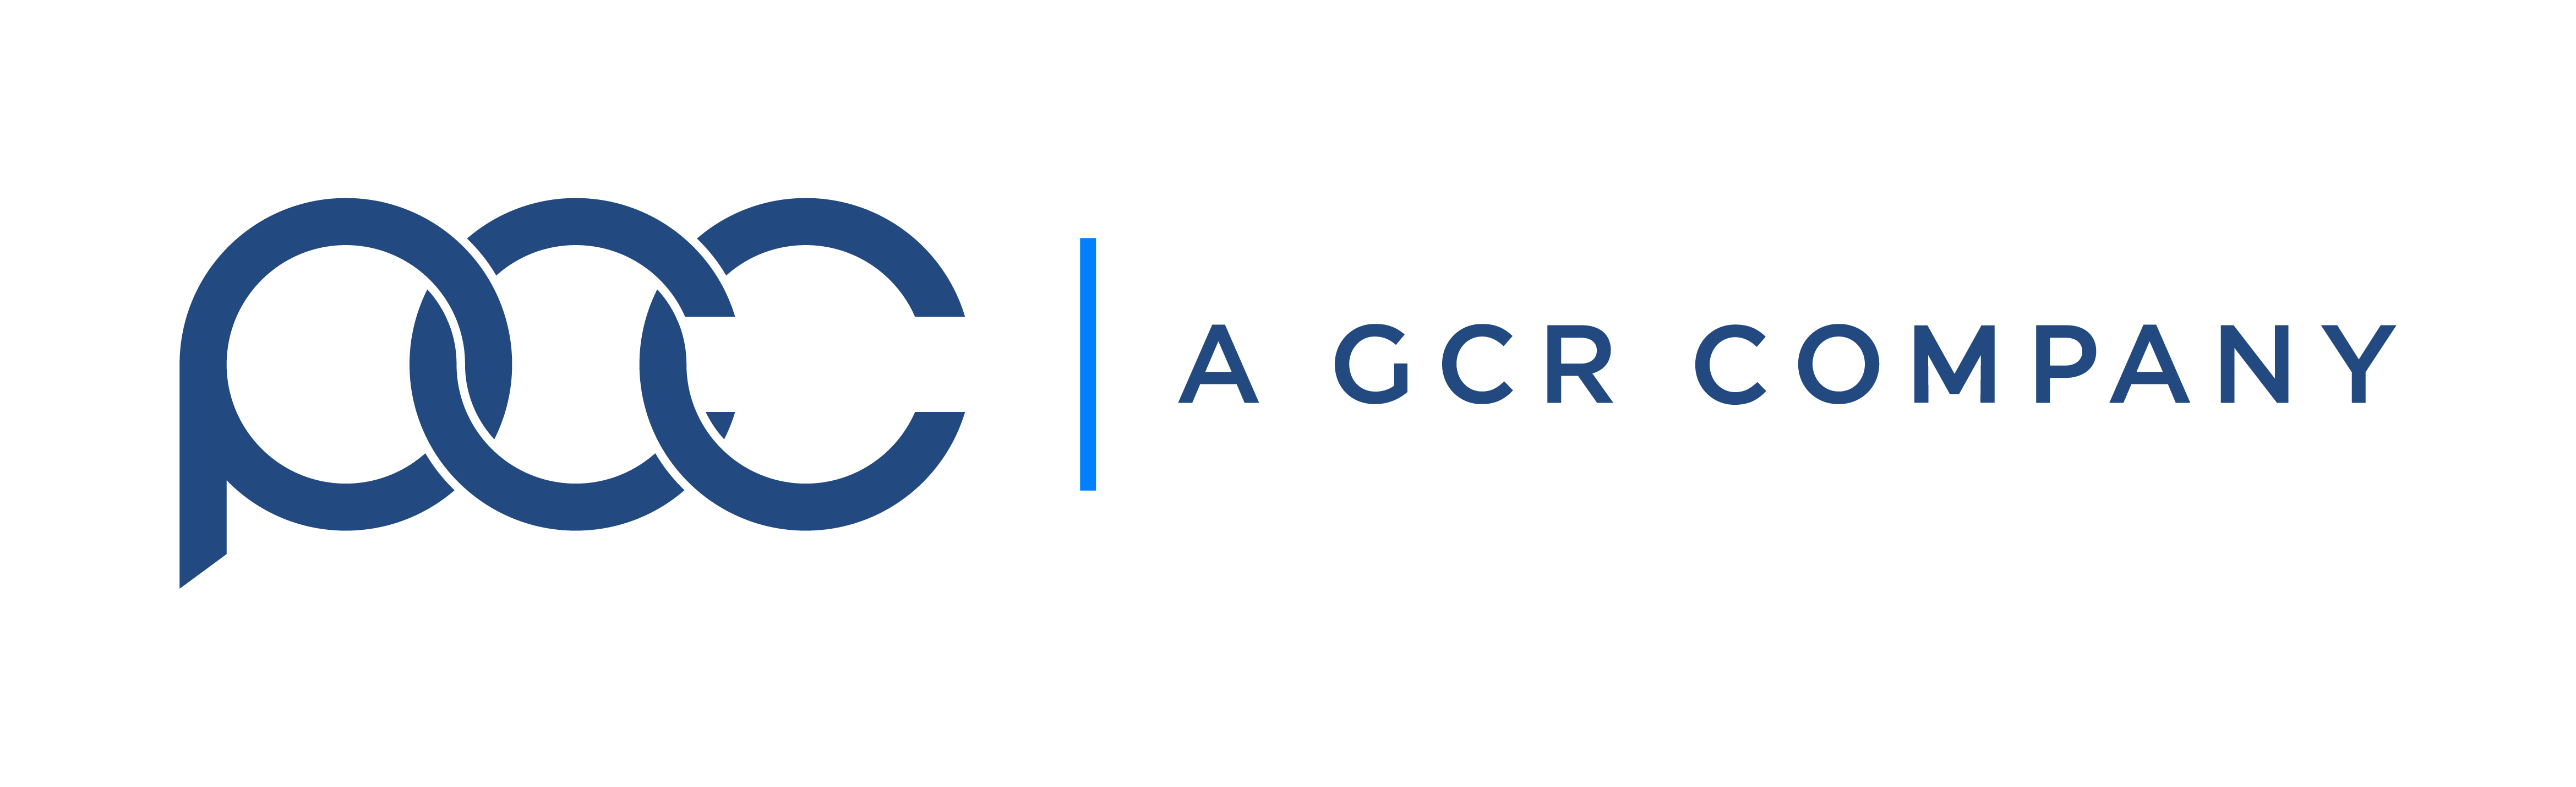 GCR Logo - GCR Inc. - Public Sector Solutions - Software and Consulting